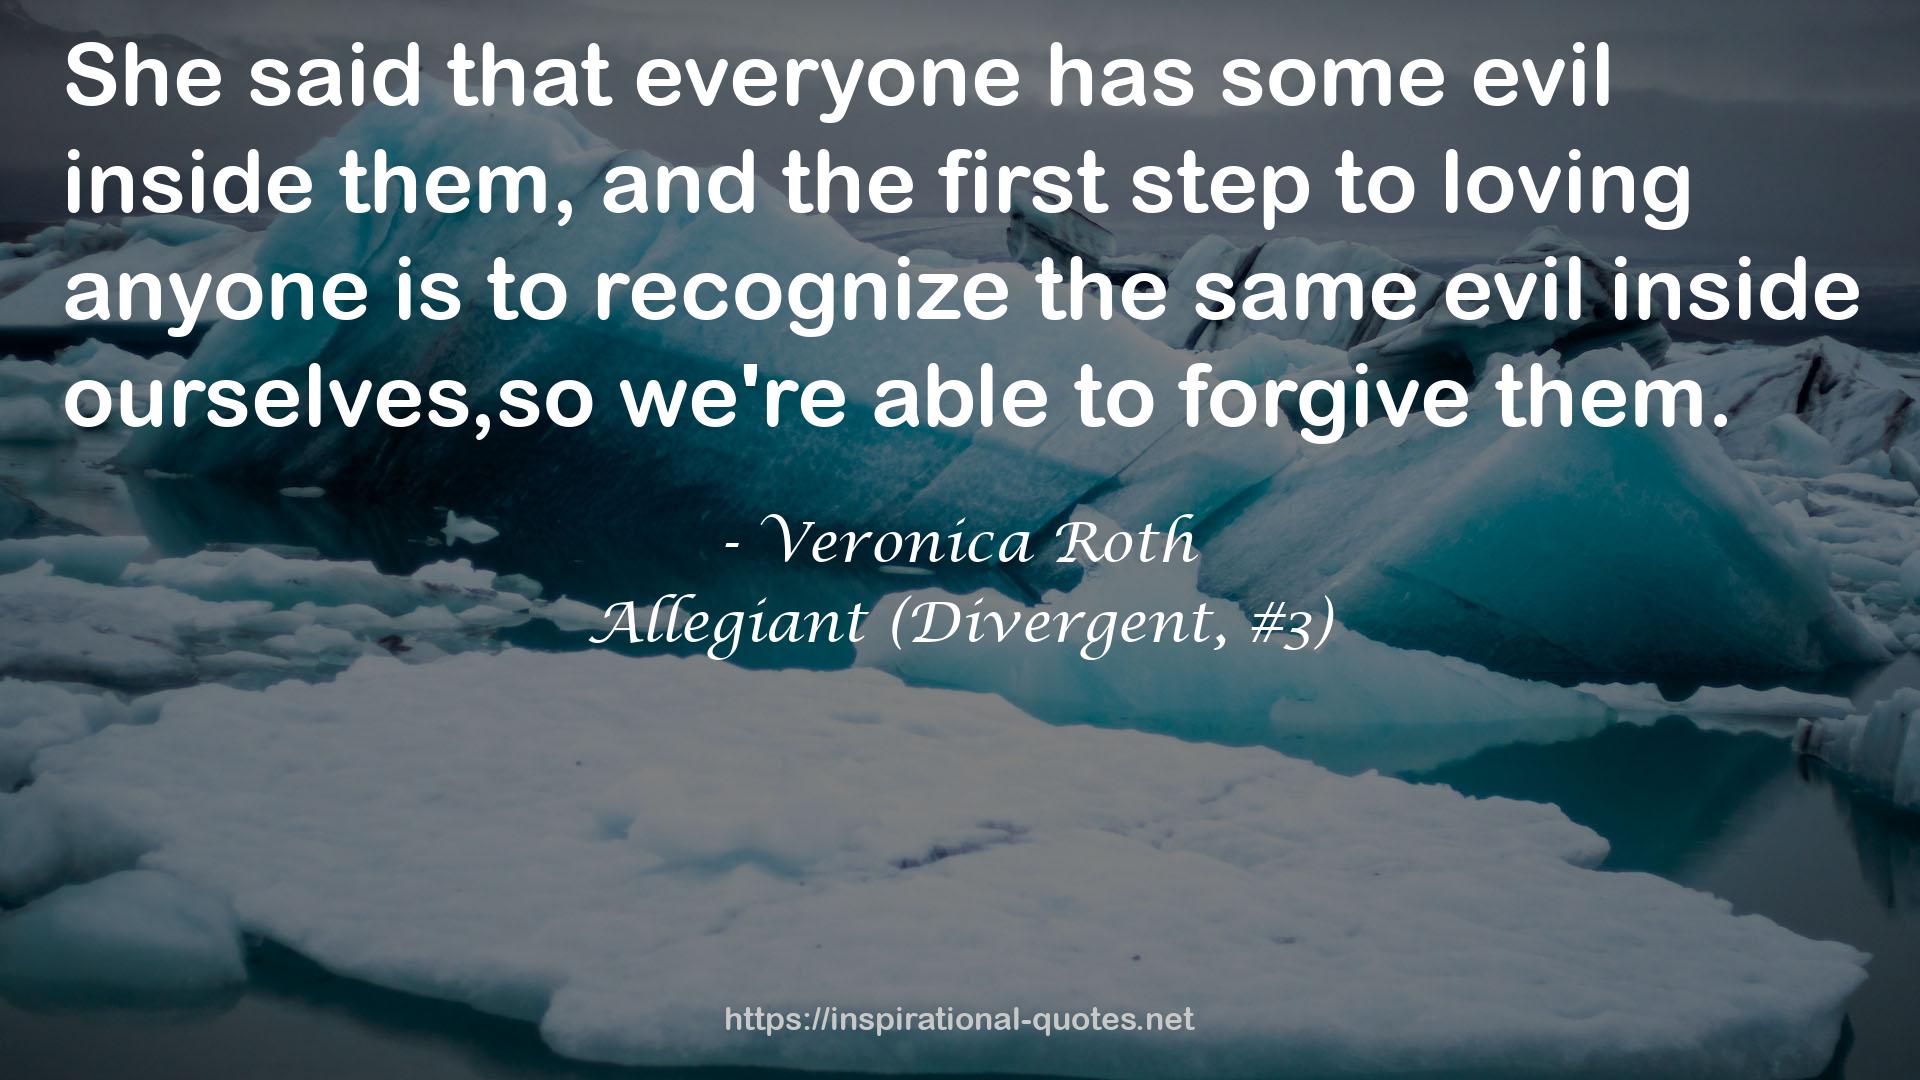 Veronica Roth QUOTES